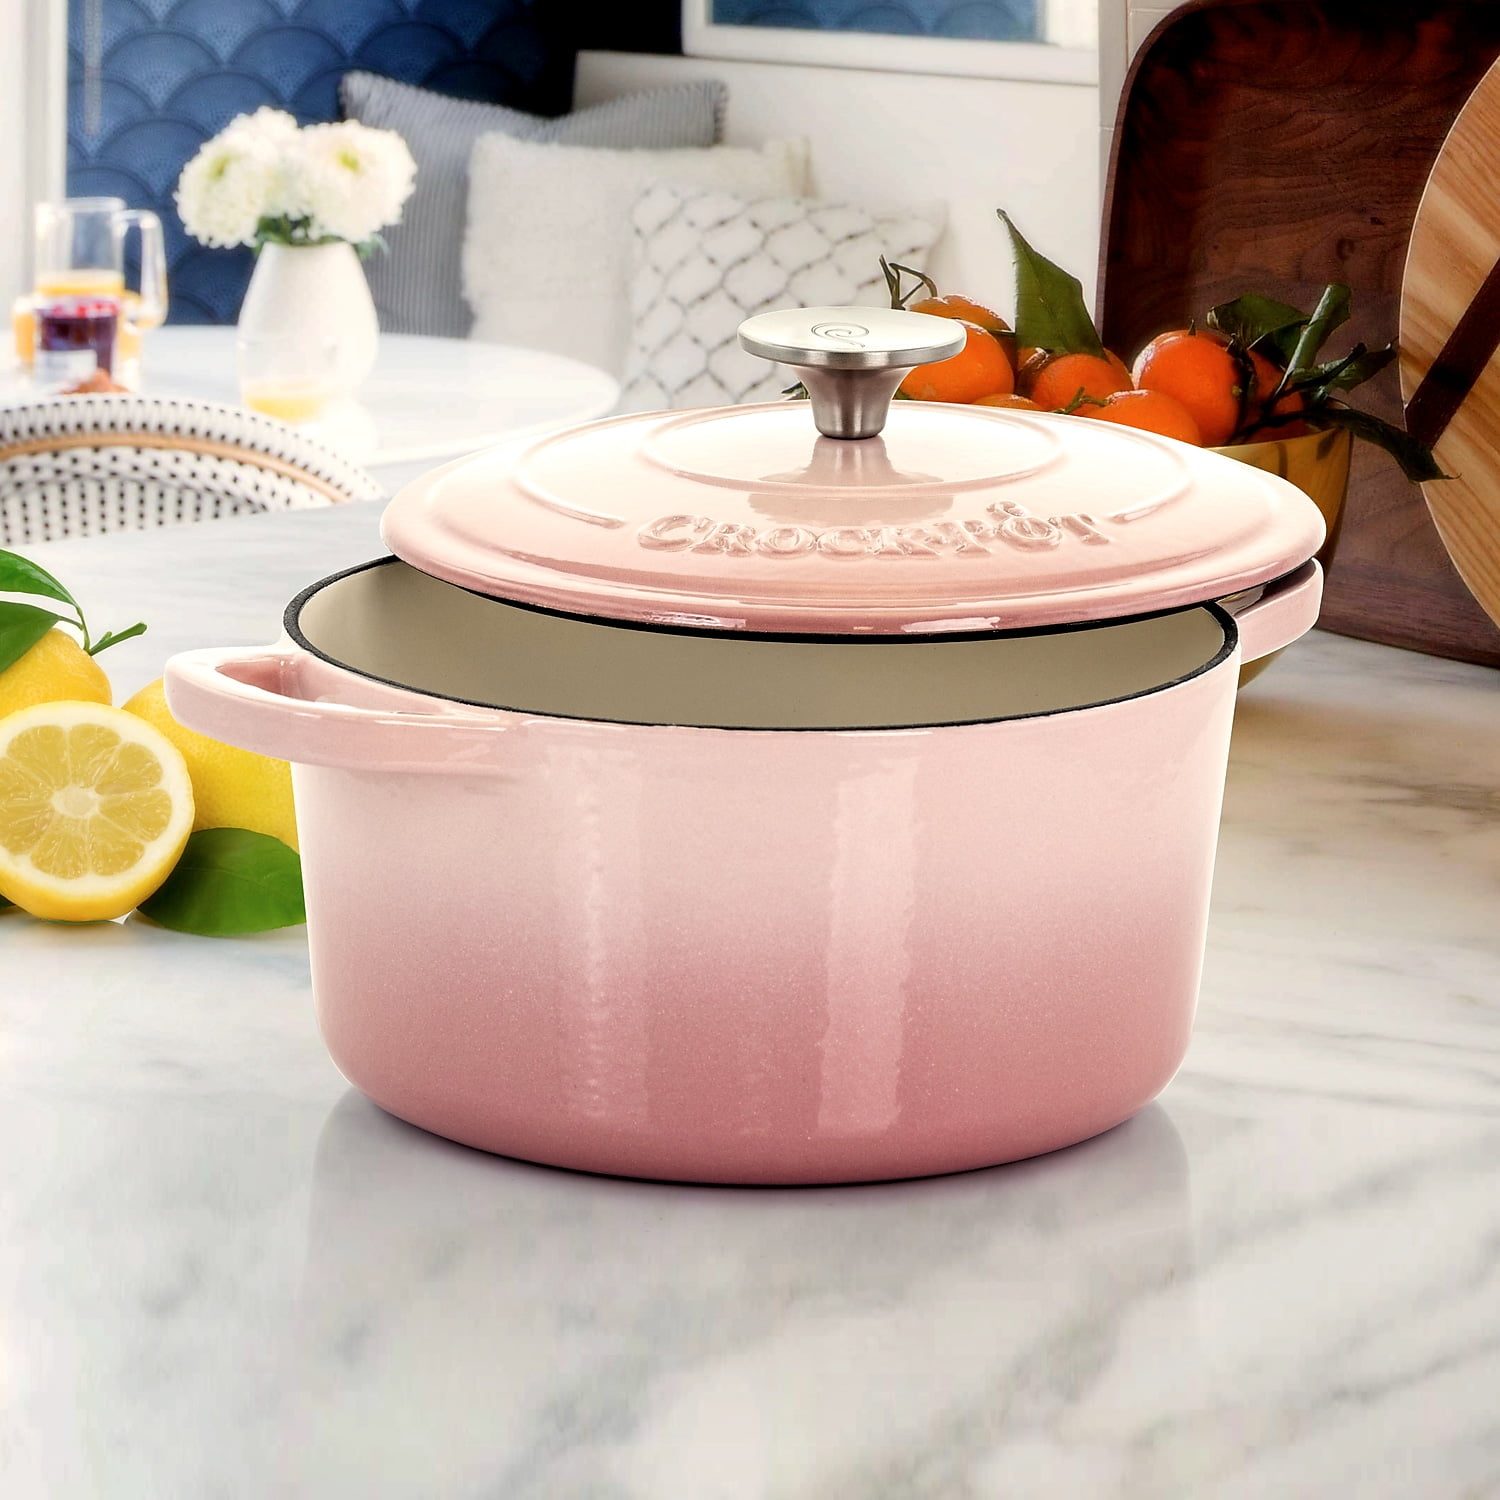 Crock Pot Artisan 3-qt Covered Dutch Oven with Mitts on QVC 